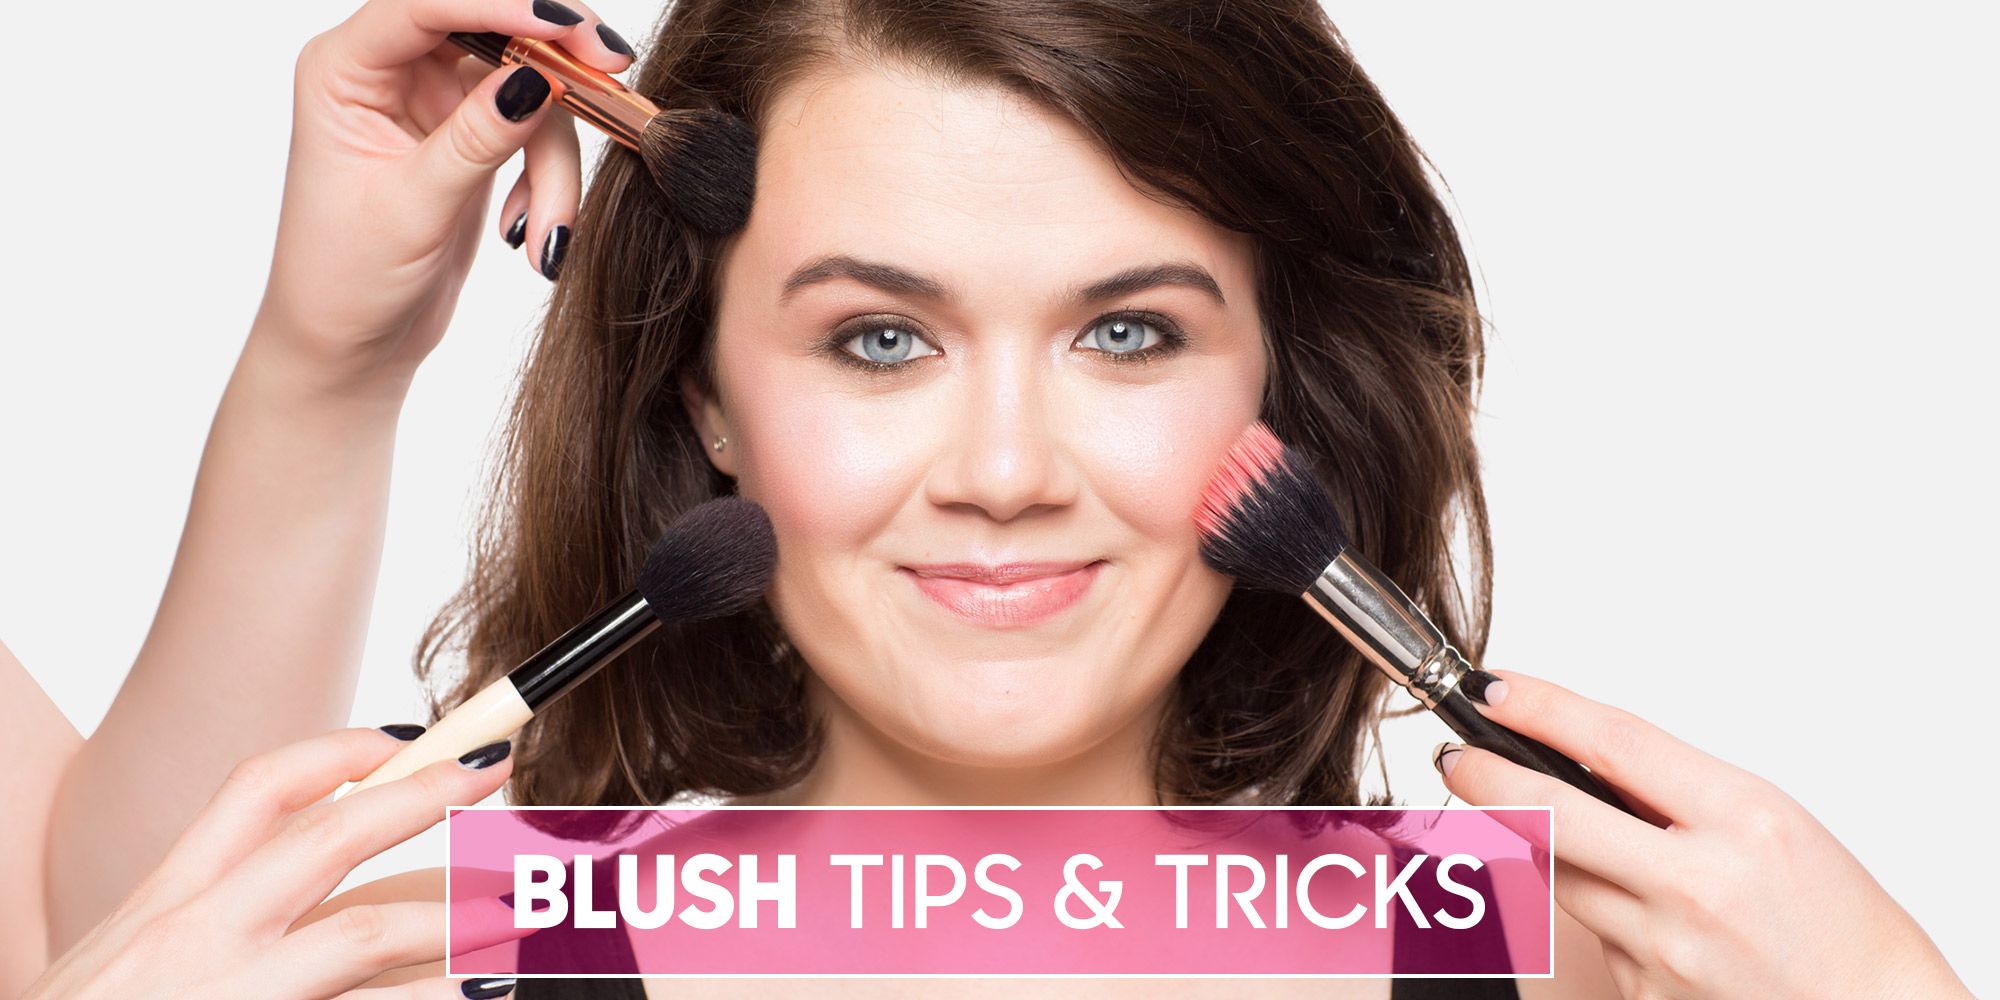 11 Best Blush Tips You Need To Know How To Apply Blush